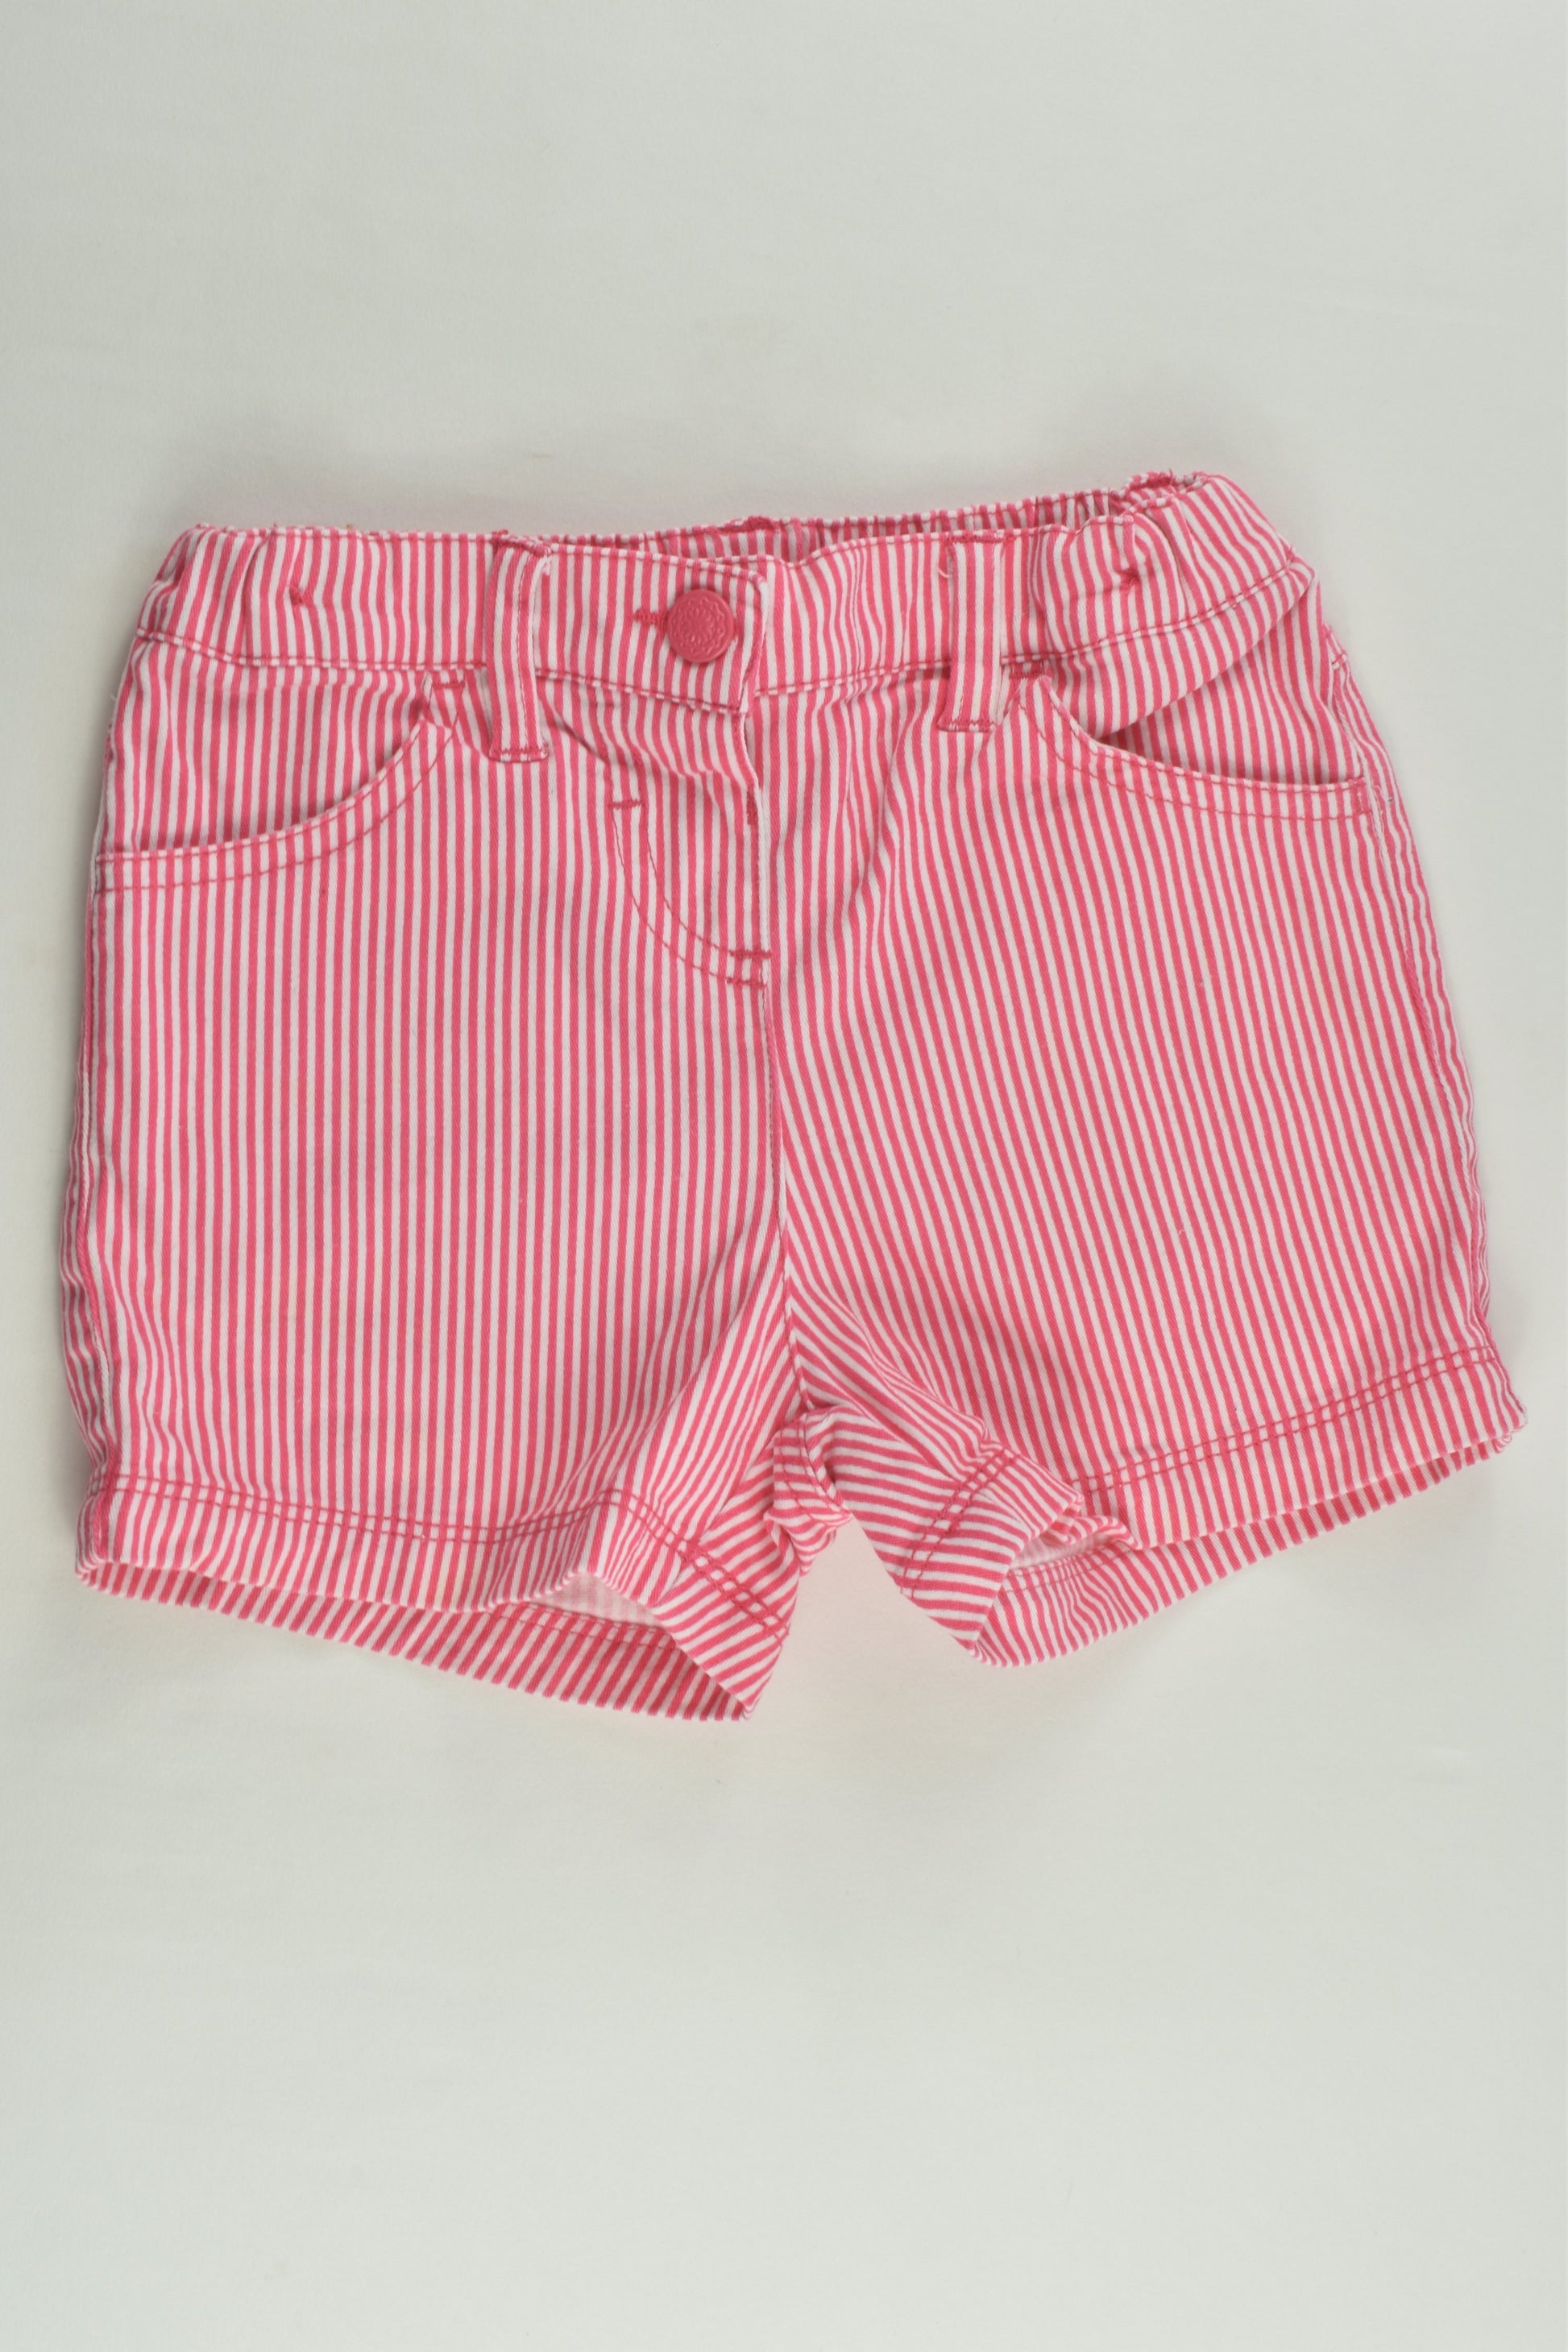 H&T Size 4 Stretchy Striped Shorts